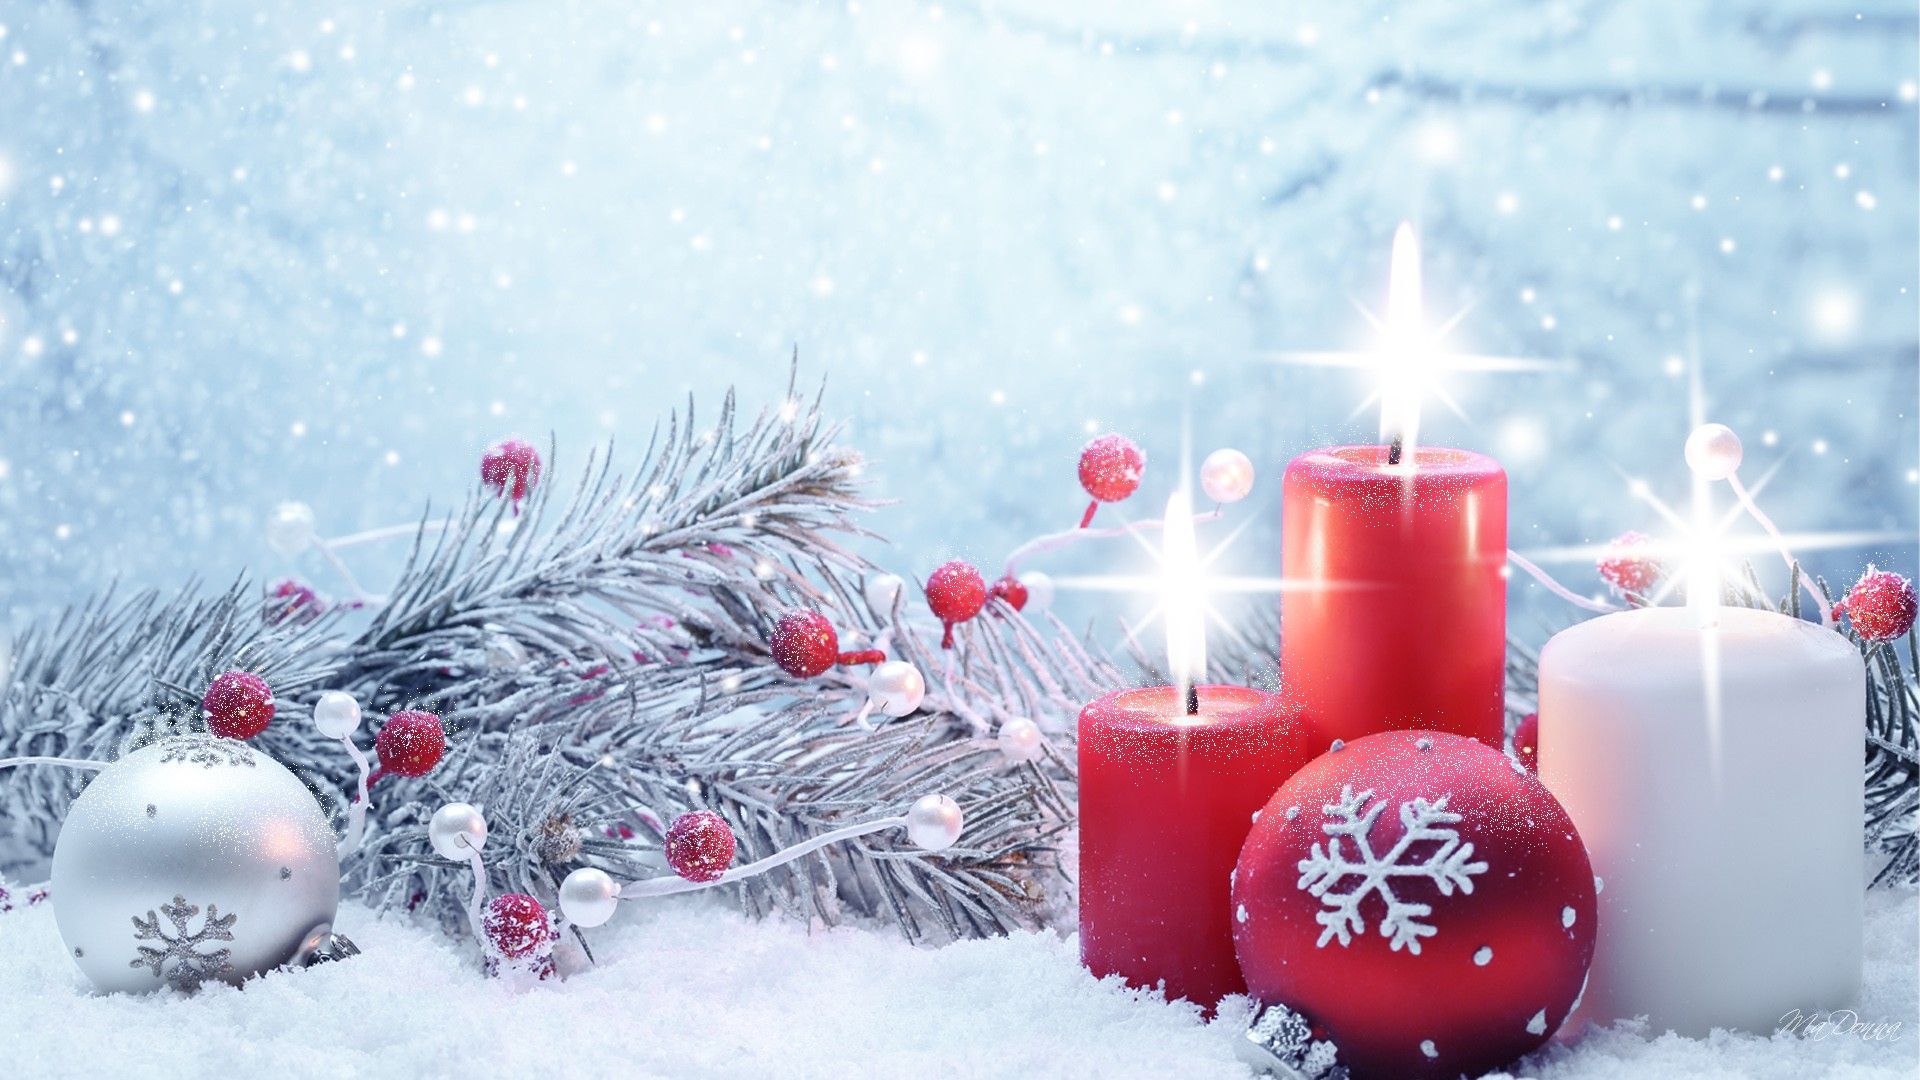 Details 100 christmas background hd images free download Abzlocal.mx